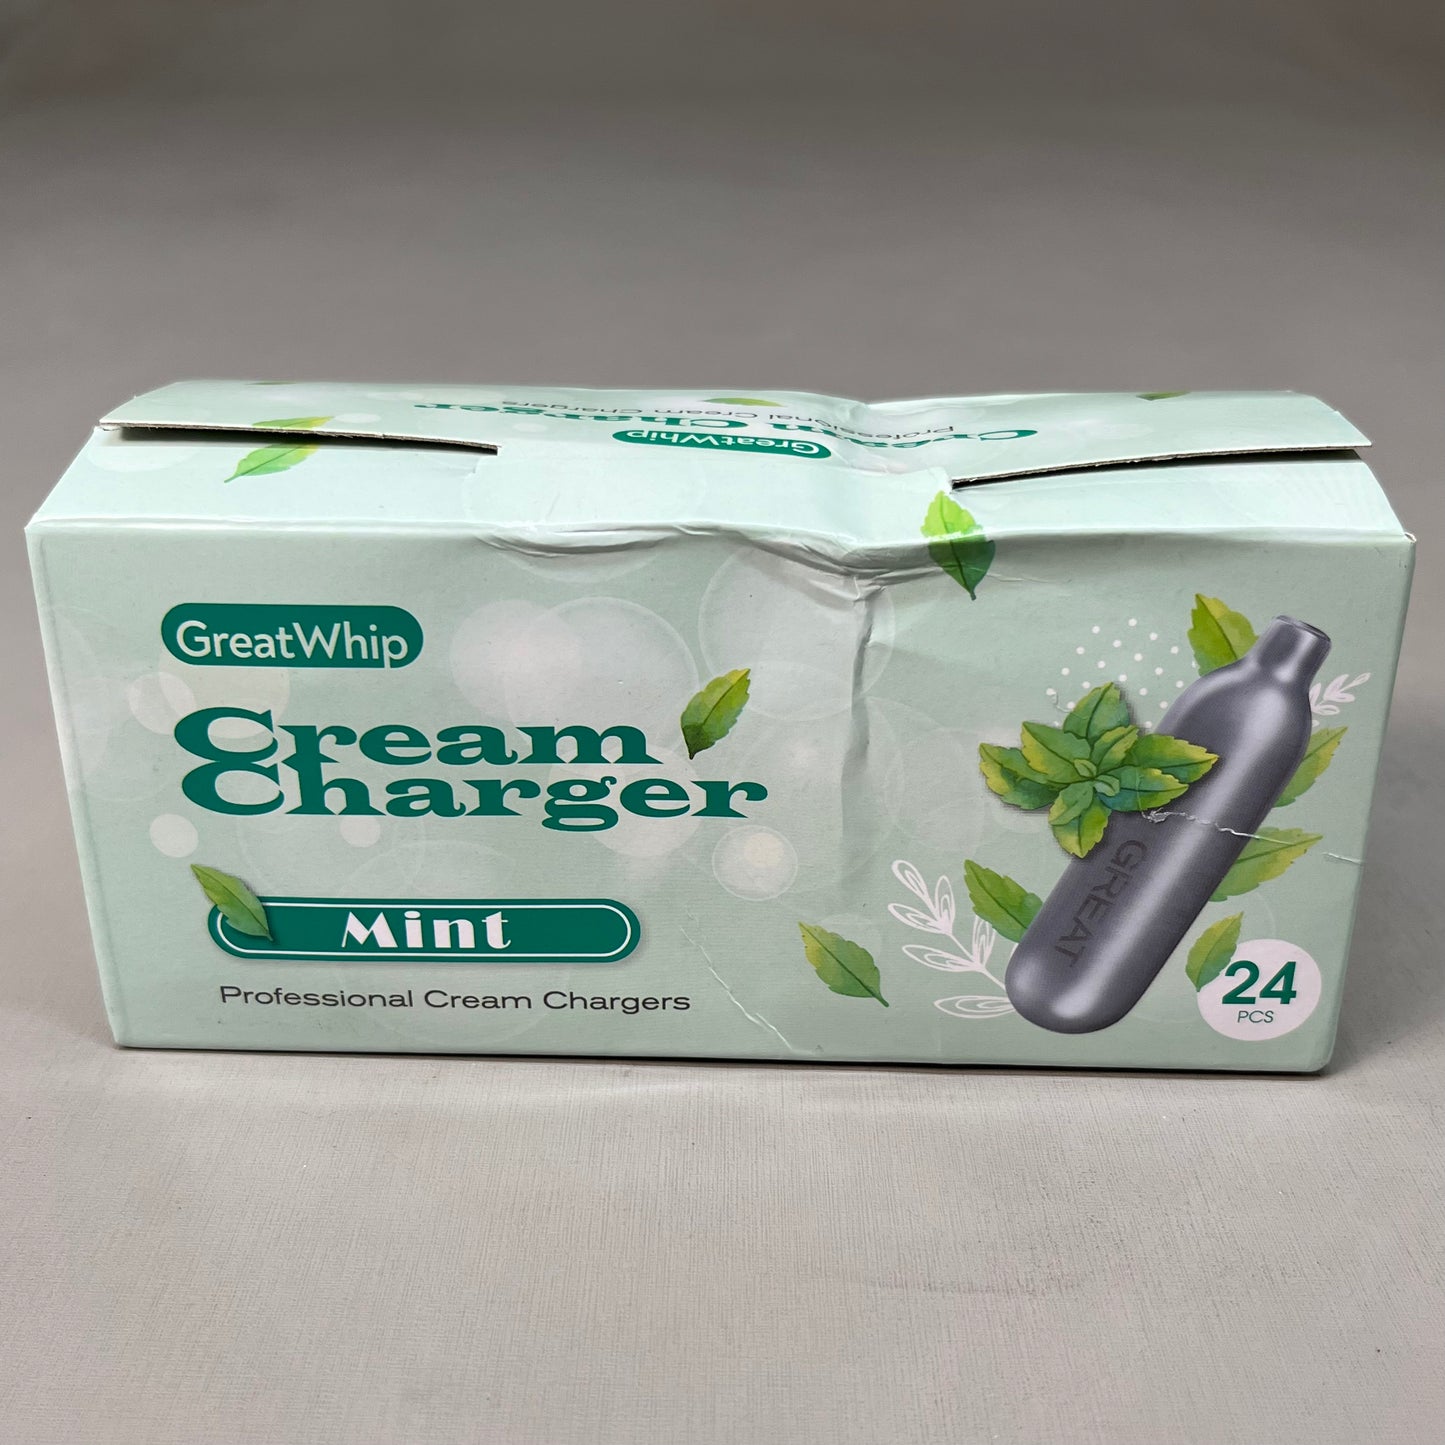 GREATWHIP Mint Cream Chargers 24 Pack Best By 03-28-2026 (New)